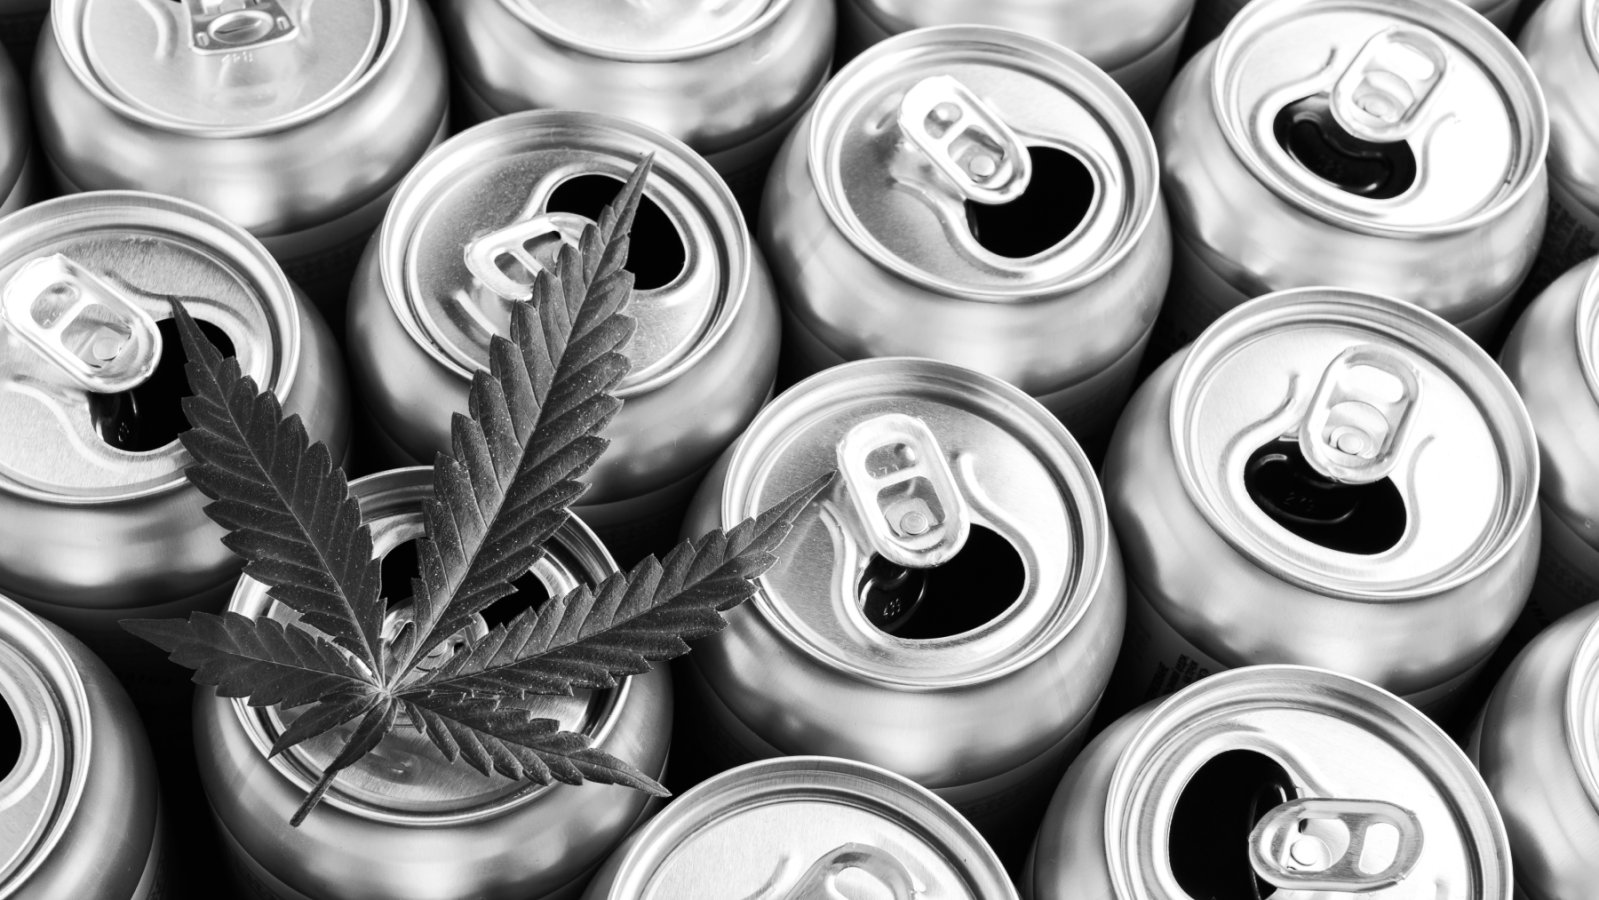 Making Cannabis More Accessible: Lessons Learned From the Alcohol Industry